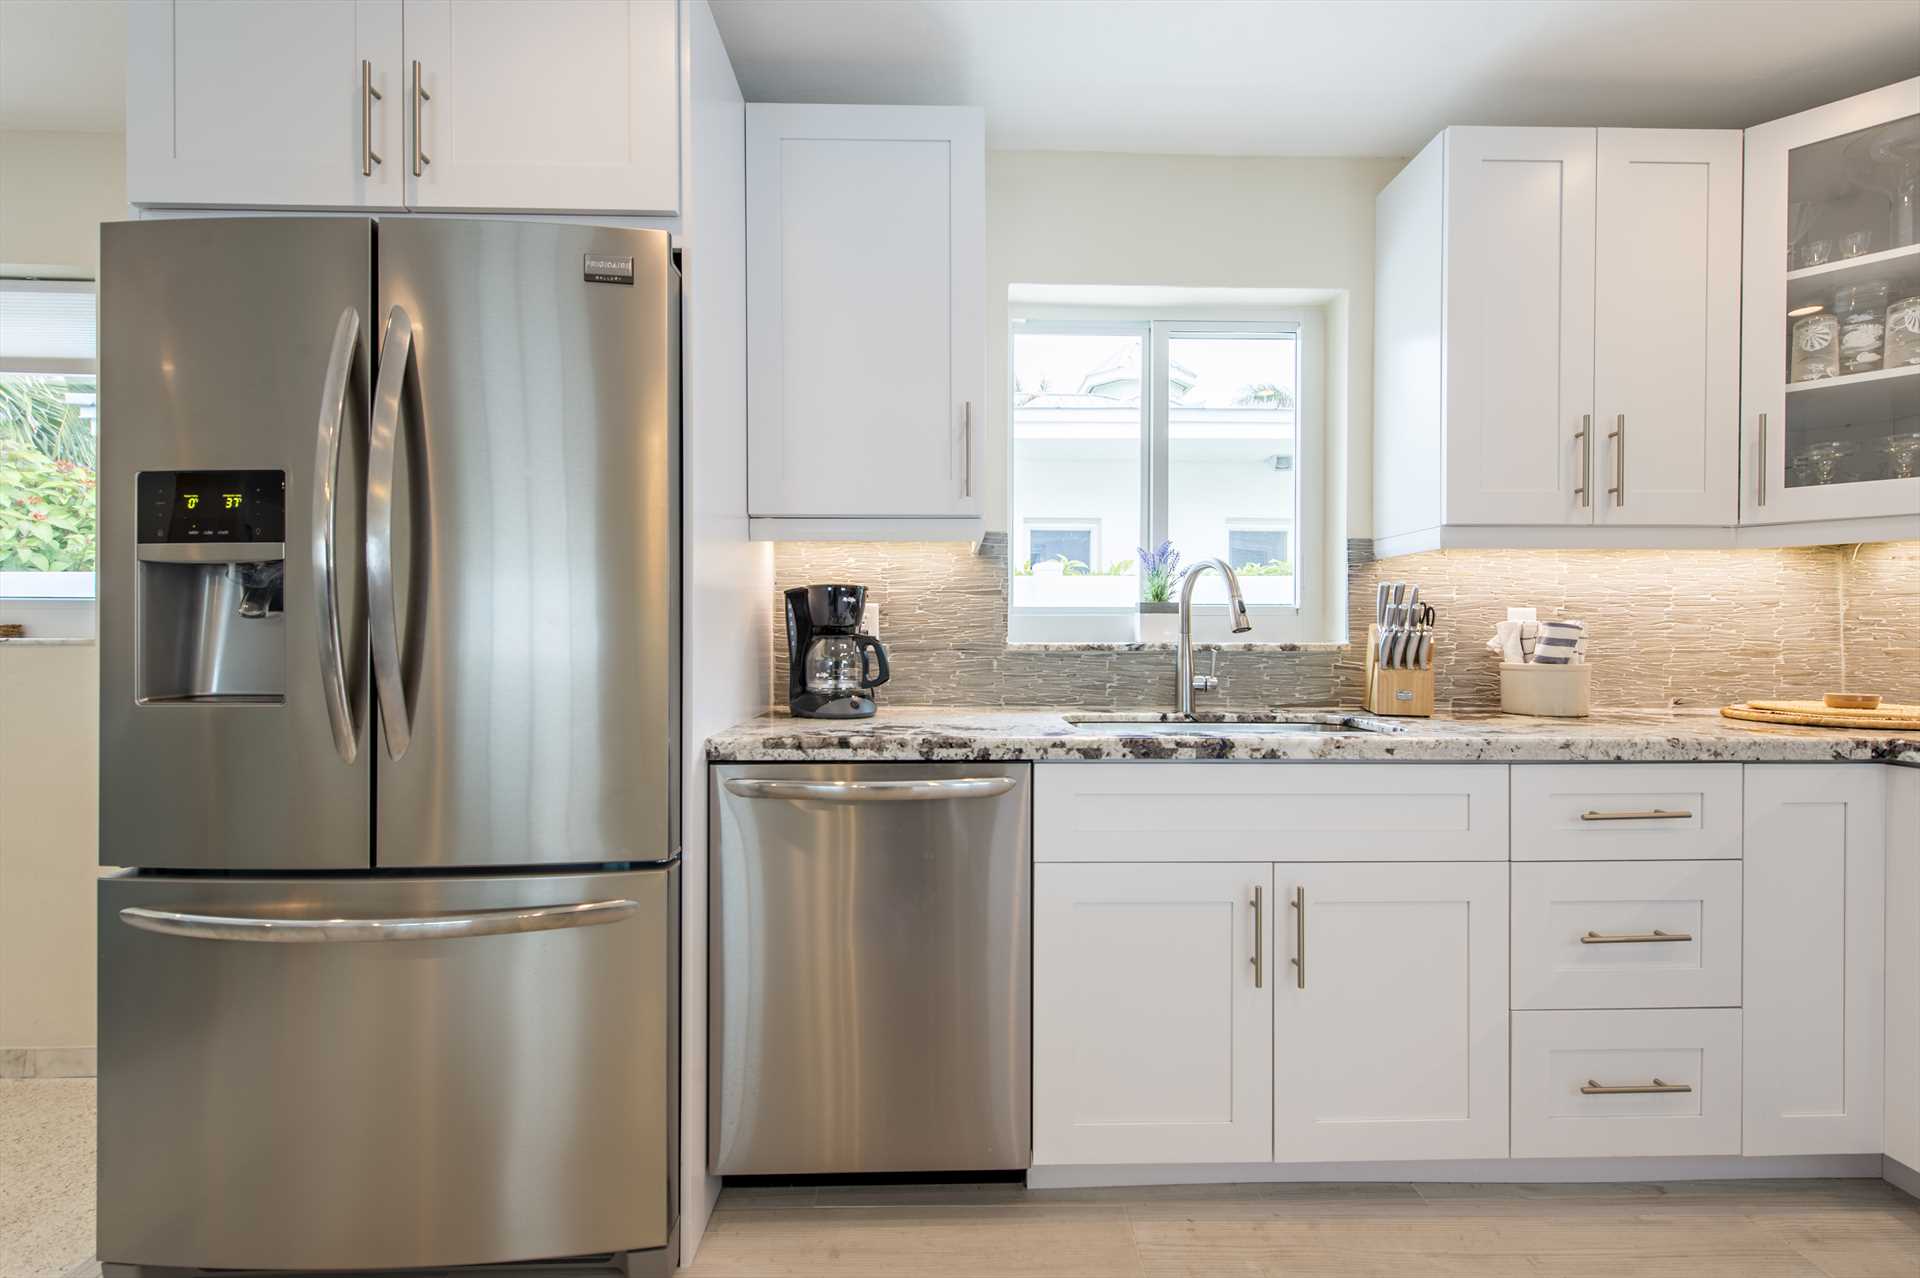 Fully equipped kitchen has all new stainless appliances and 